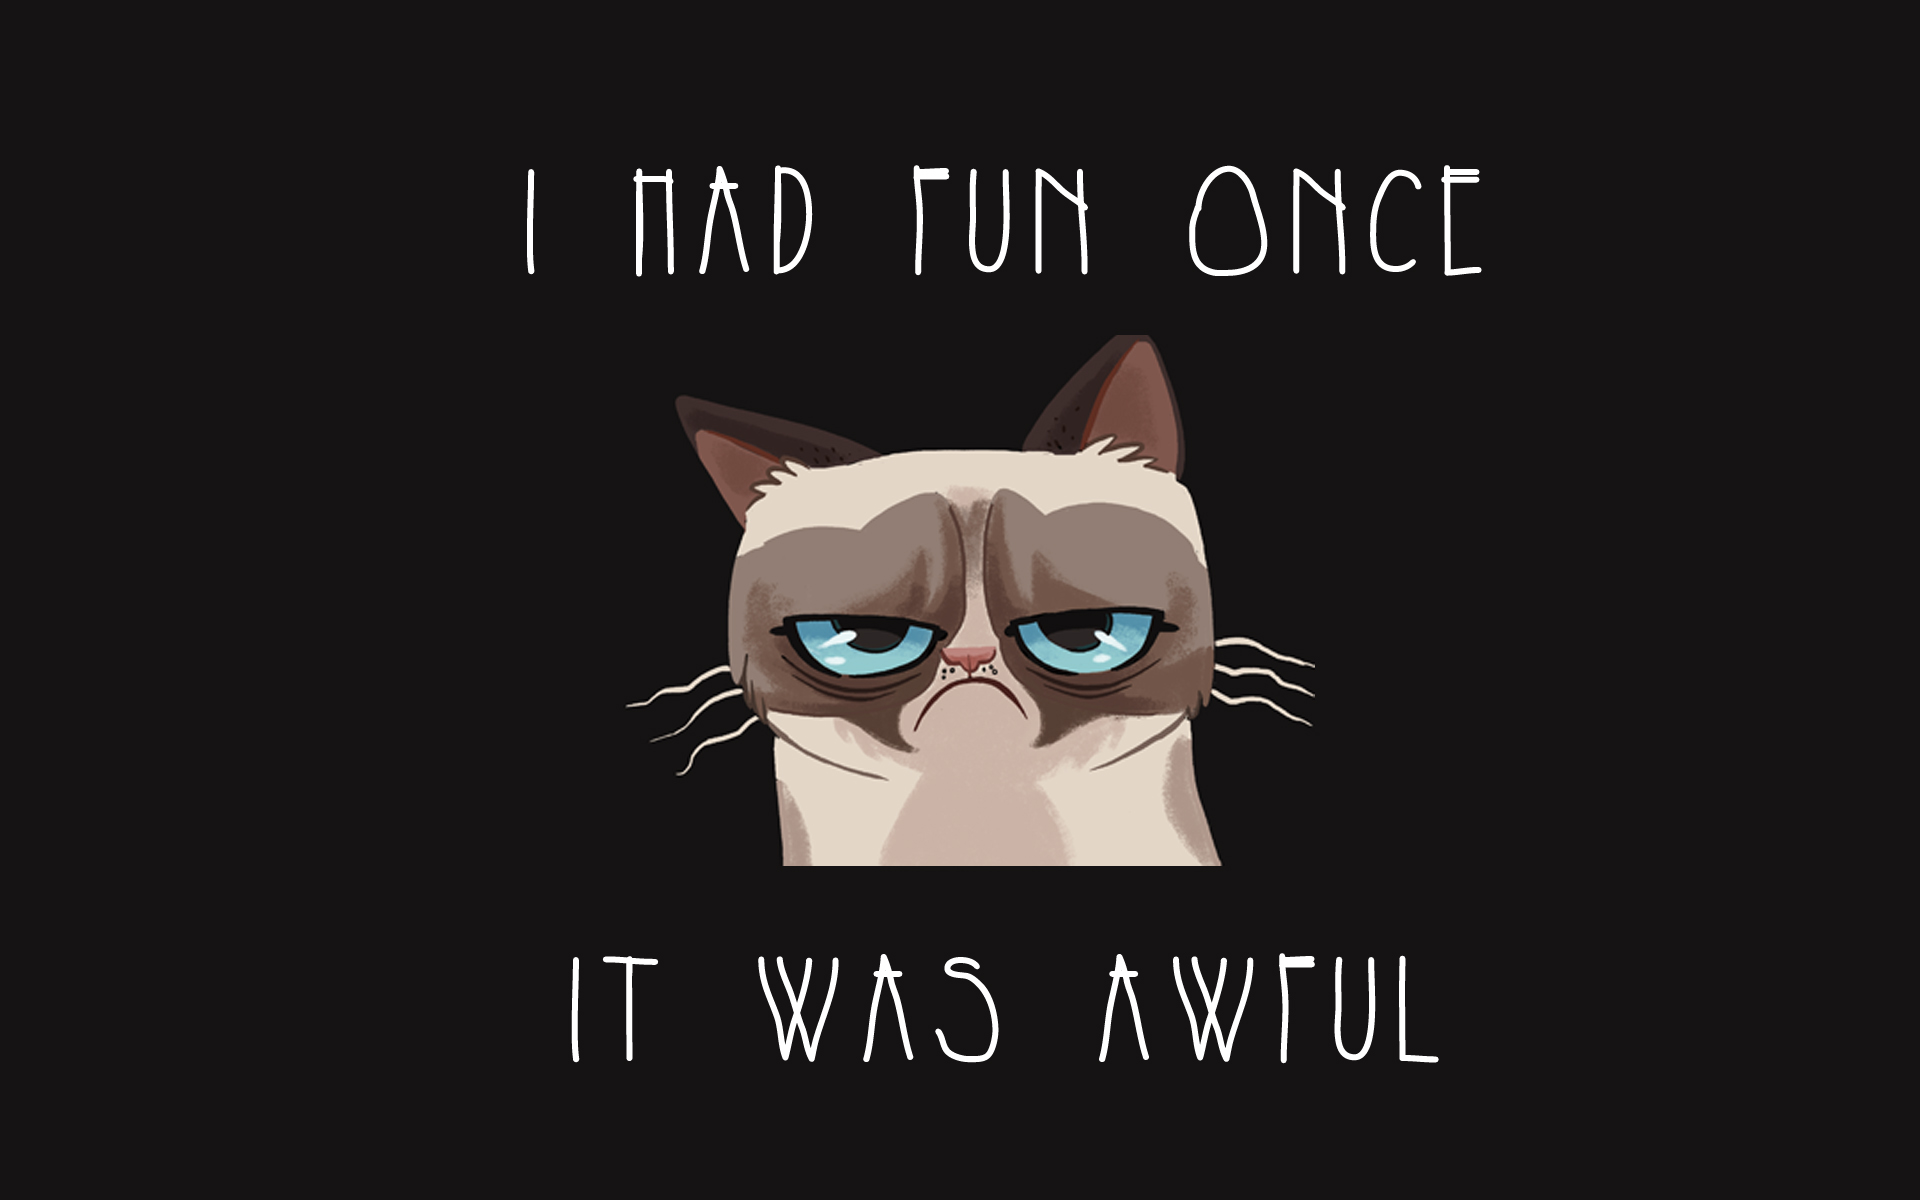 Funny Cartoon Cat 4 Free Hd Wallpaper - Funnypicture.org